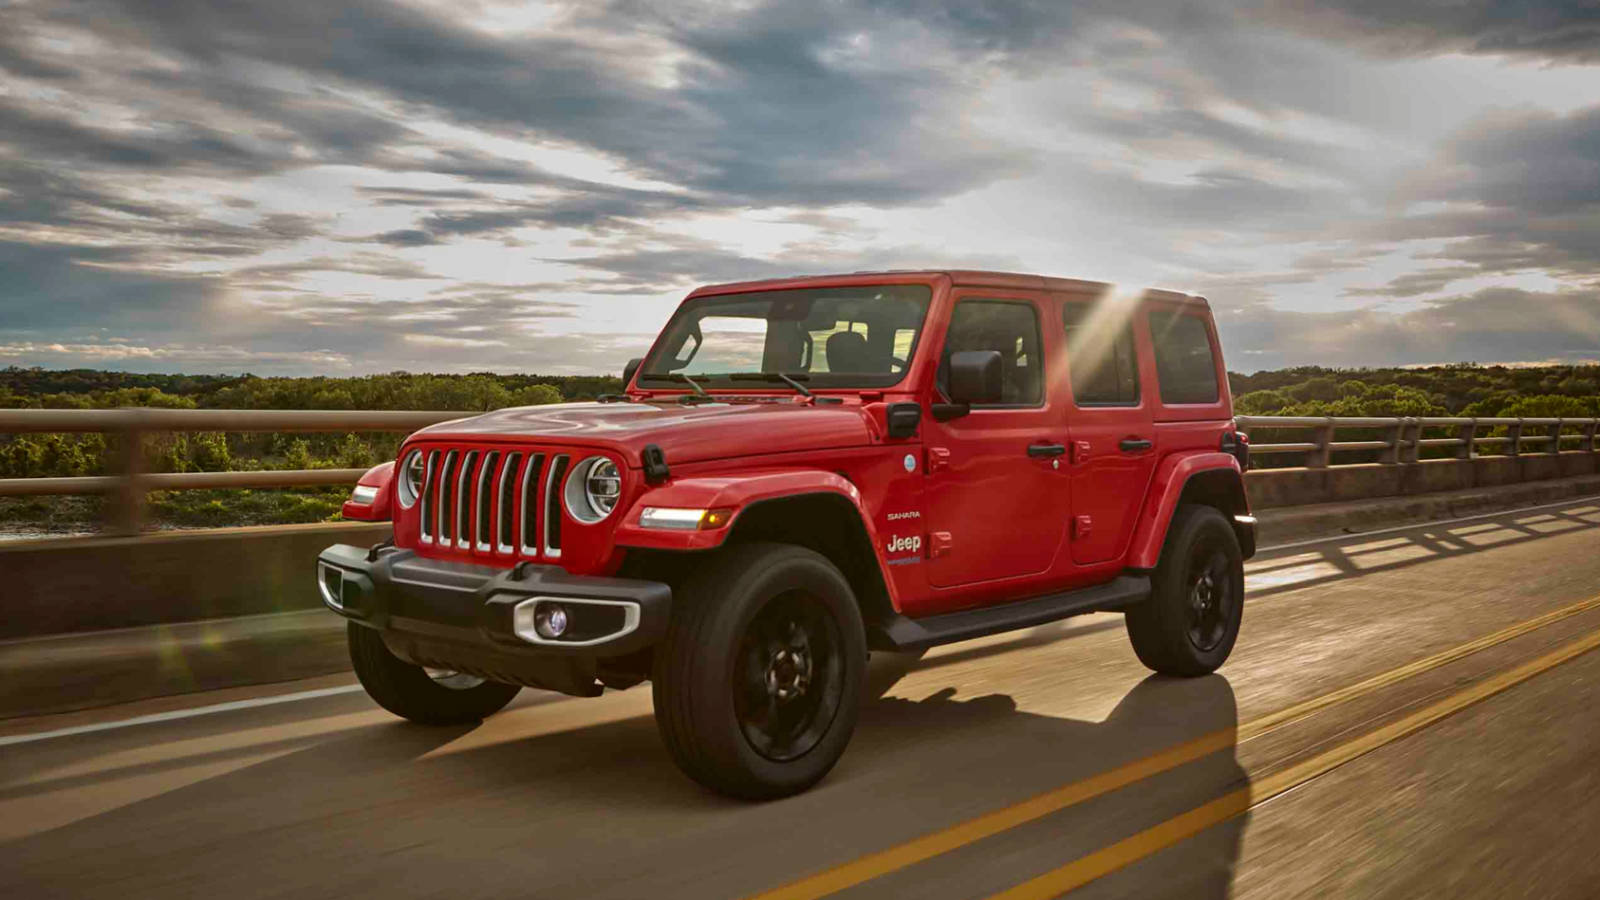 Jeep Wrangler Sahara Review - Dubi Cars - New and Used Cars